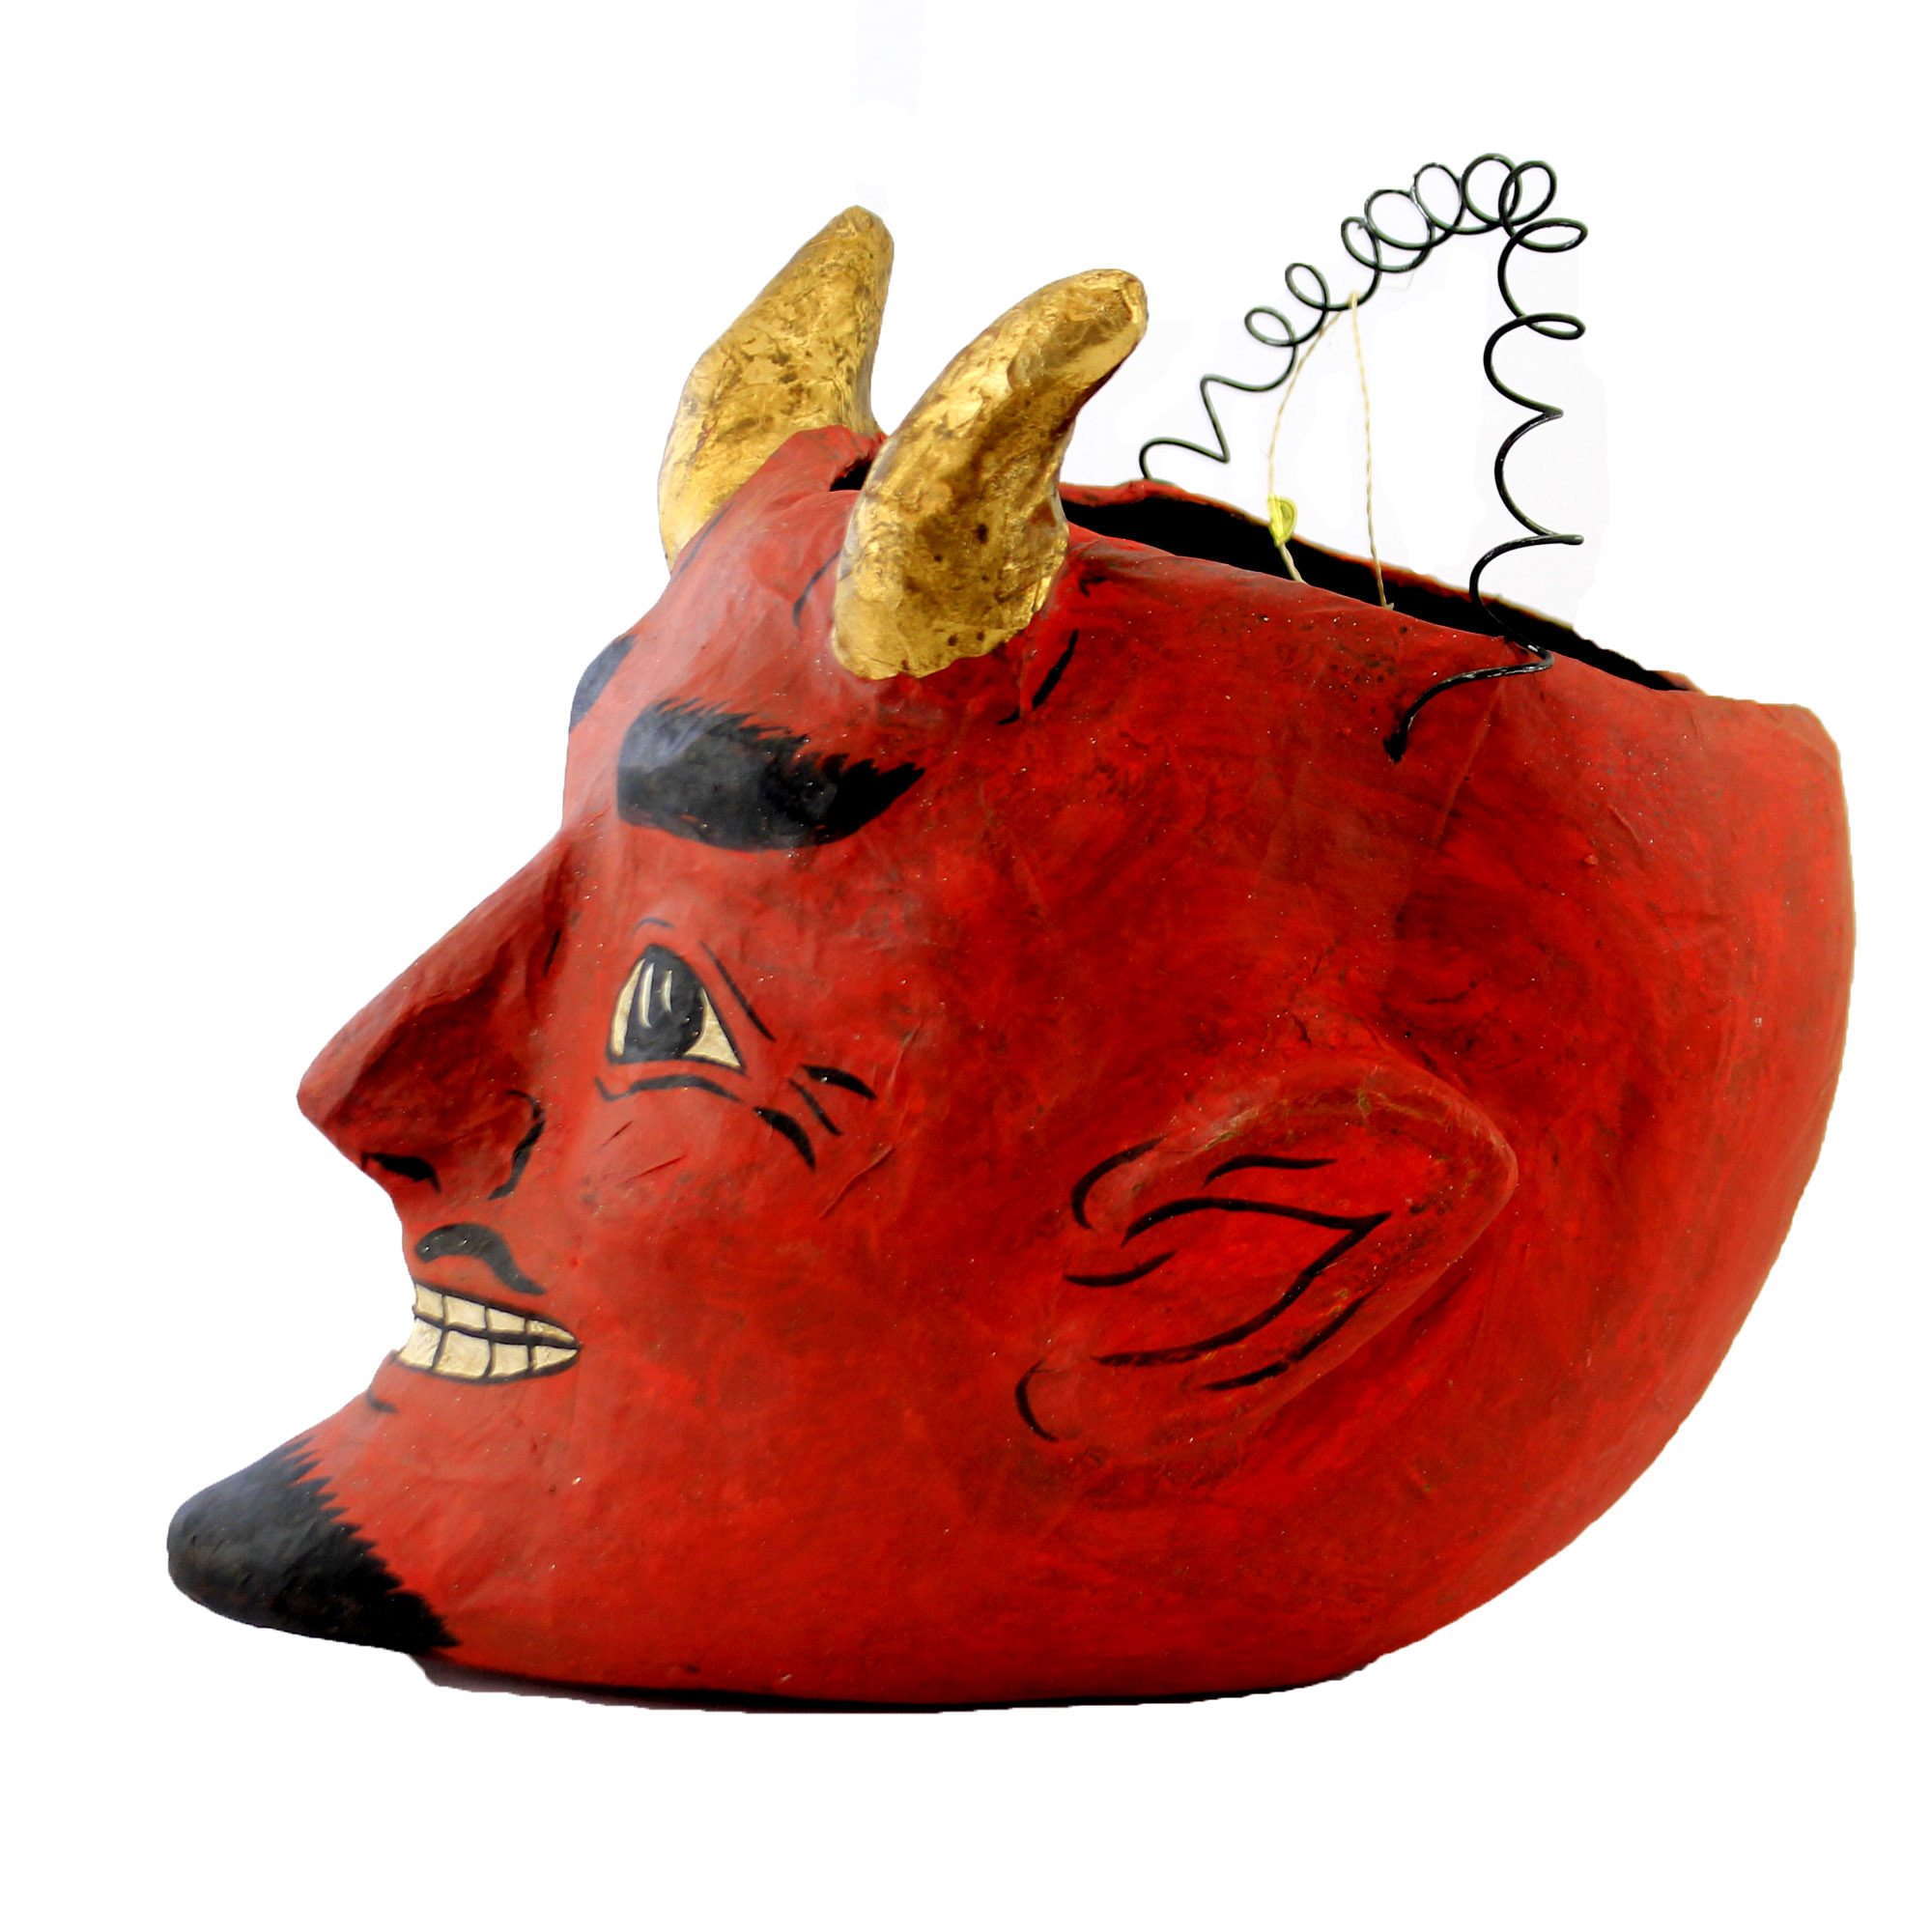 Cody Foster Vintage Style Devil Large Paper Mache Candy Bucket Halloween Pm929b - image 3 of 3